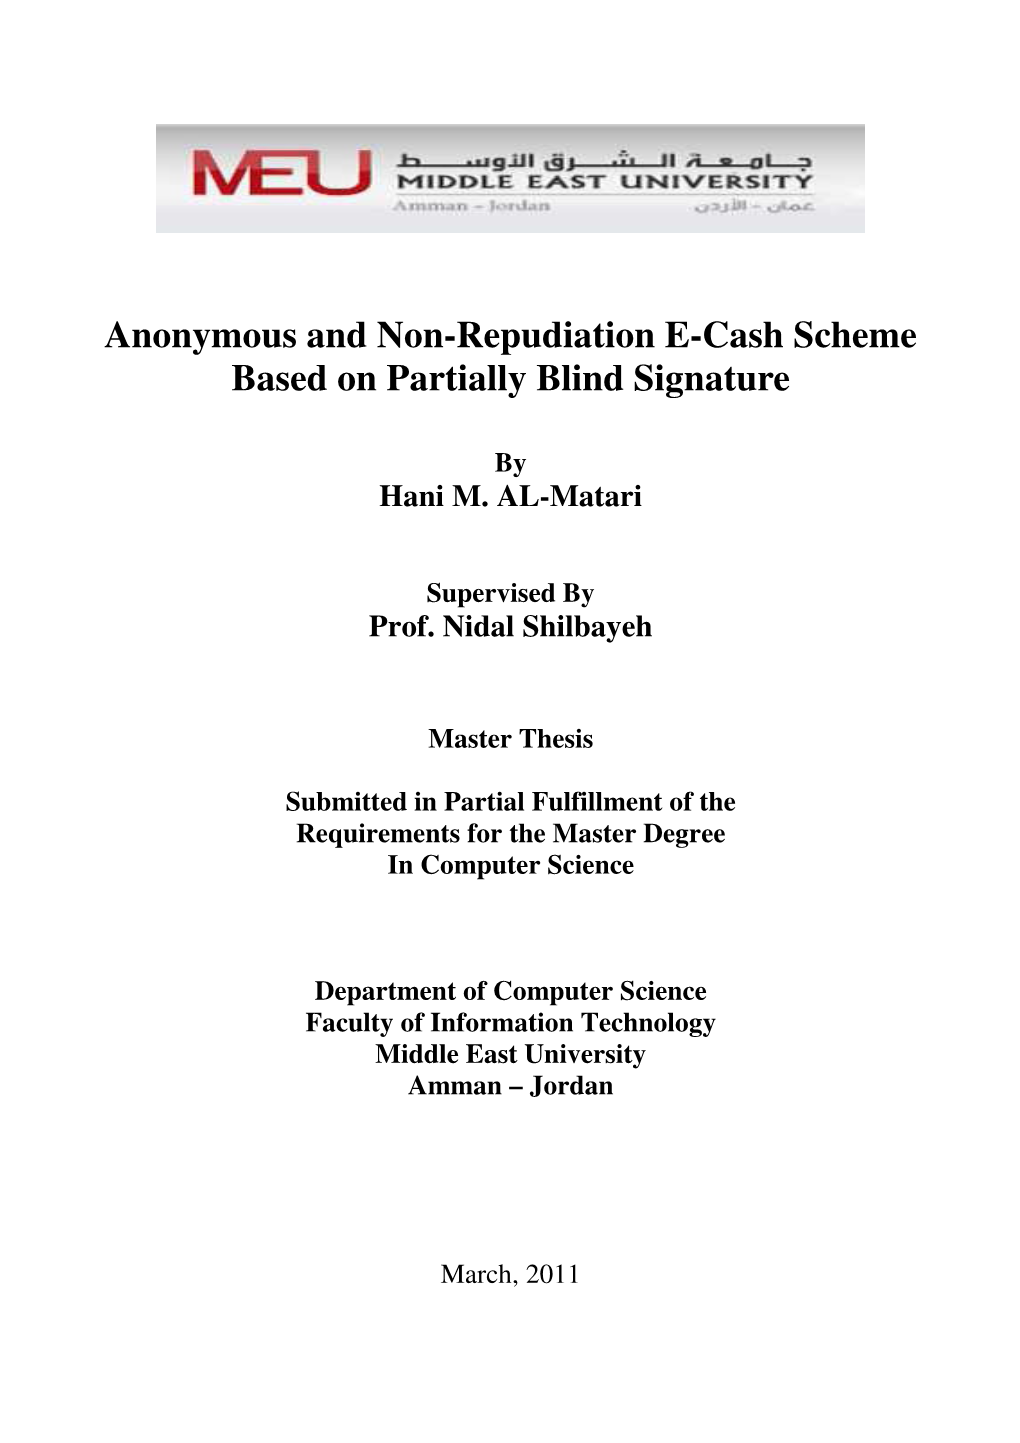 Anonymous and Non-Repudiation E-Cash Scheme Based on Partially Blind Signature